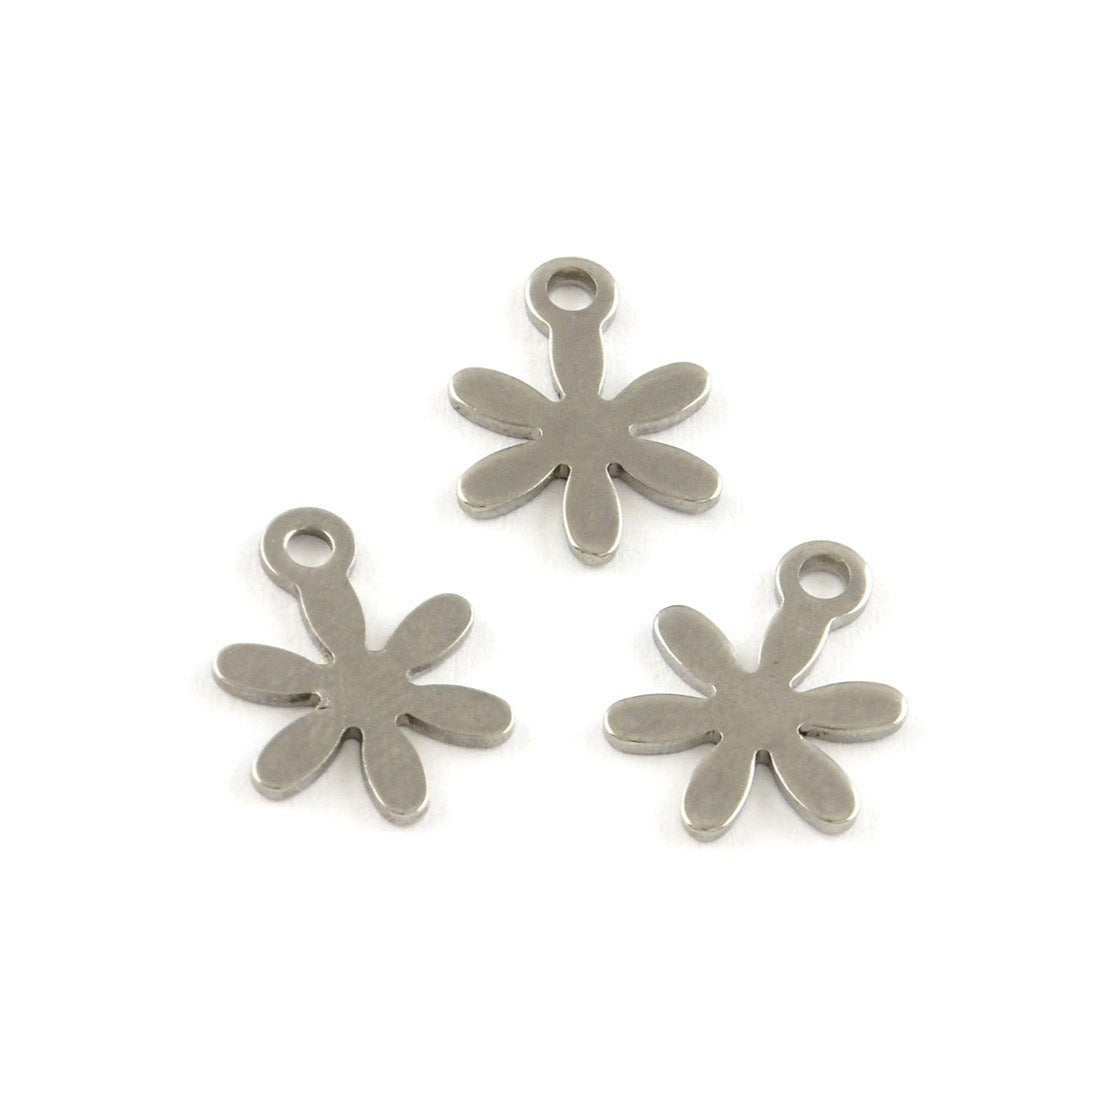 Flower charms stainless steel hypoallergenic charms 5pcs